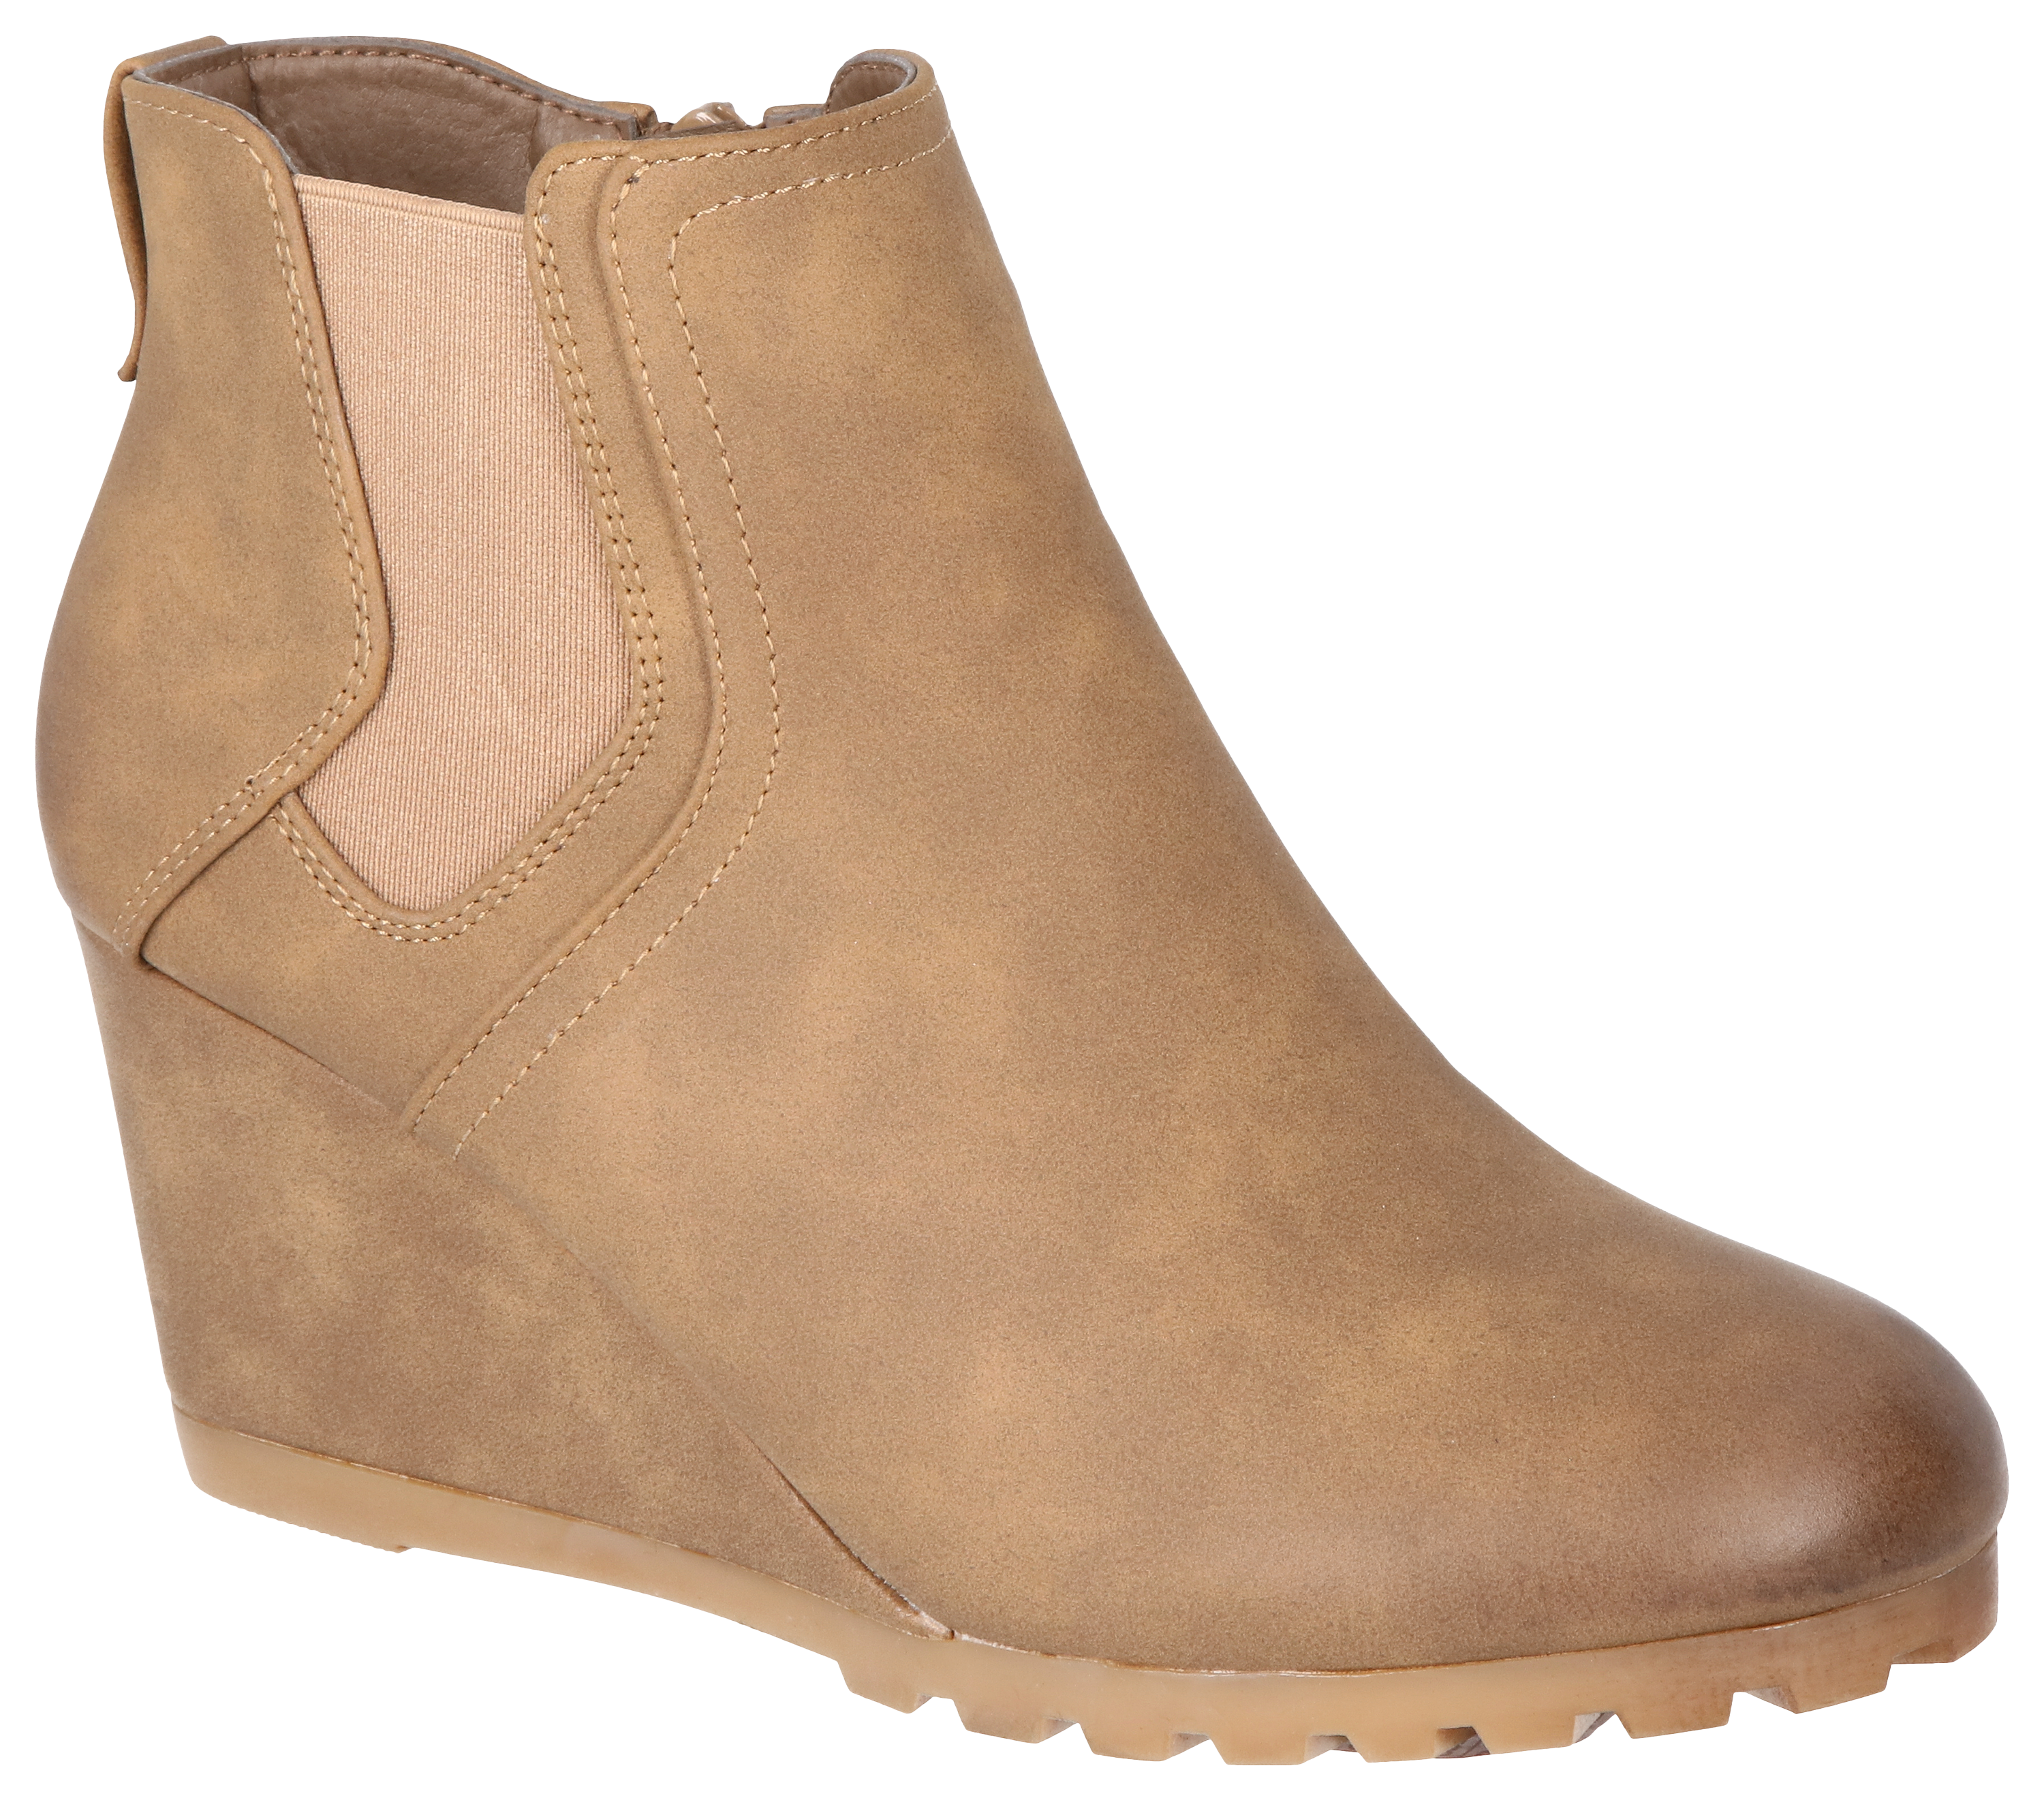 Natural Reflections Trista Rugged Boots for Ladies - Taupe - 7.5M